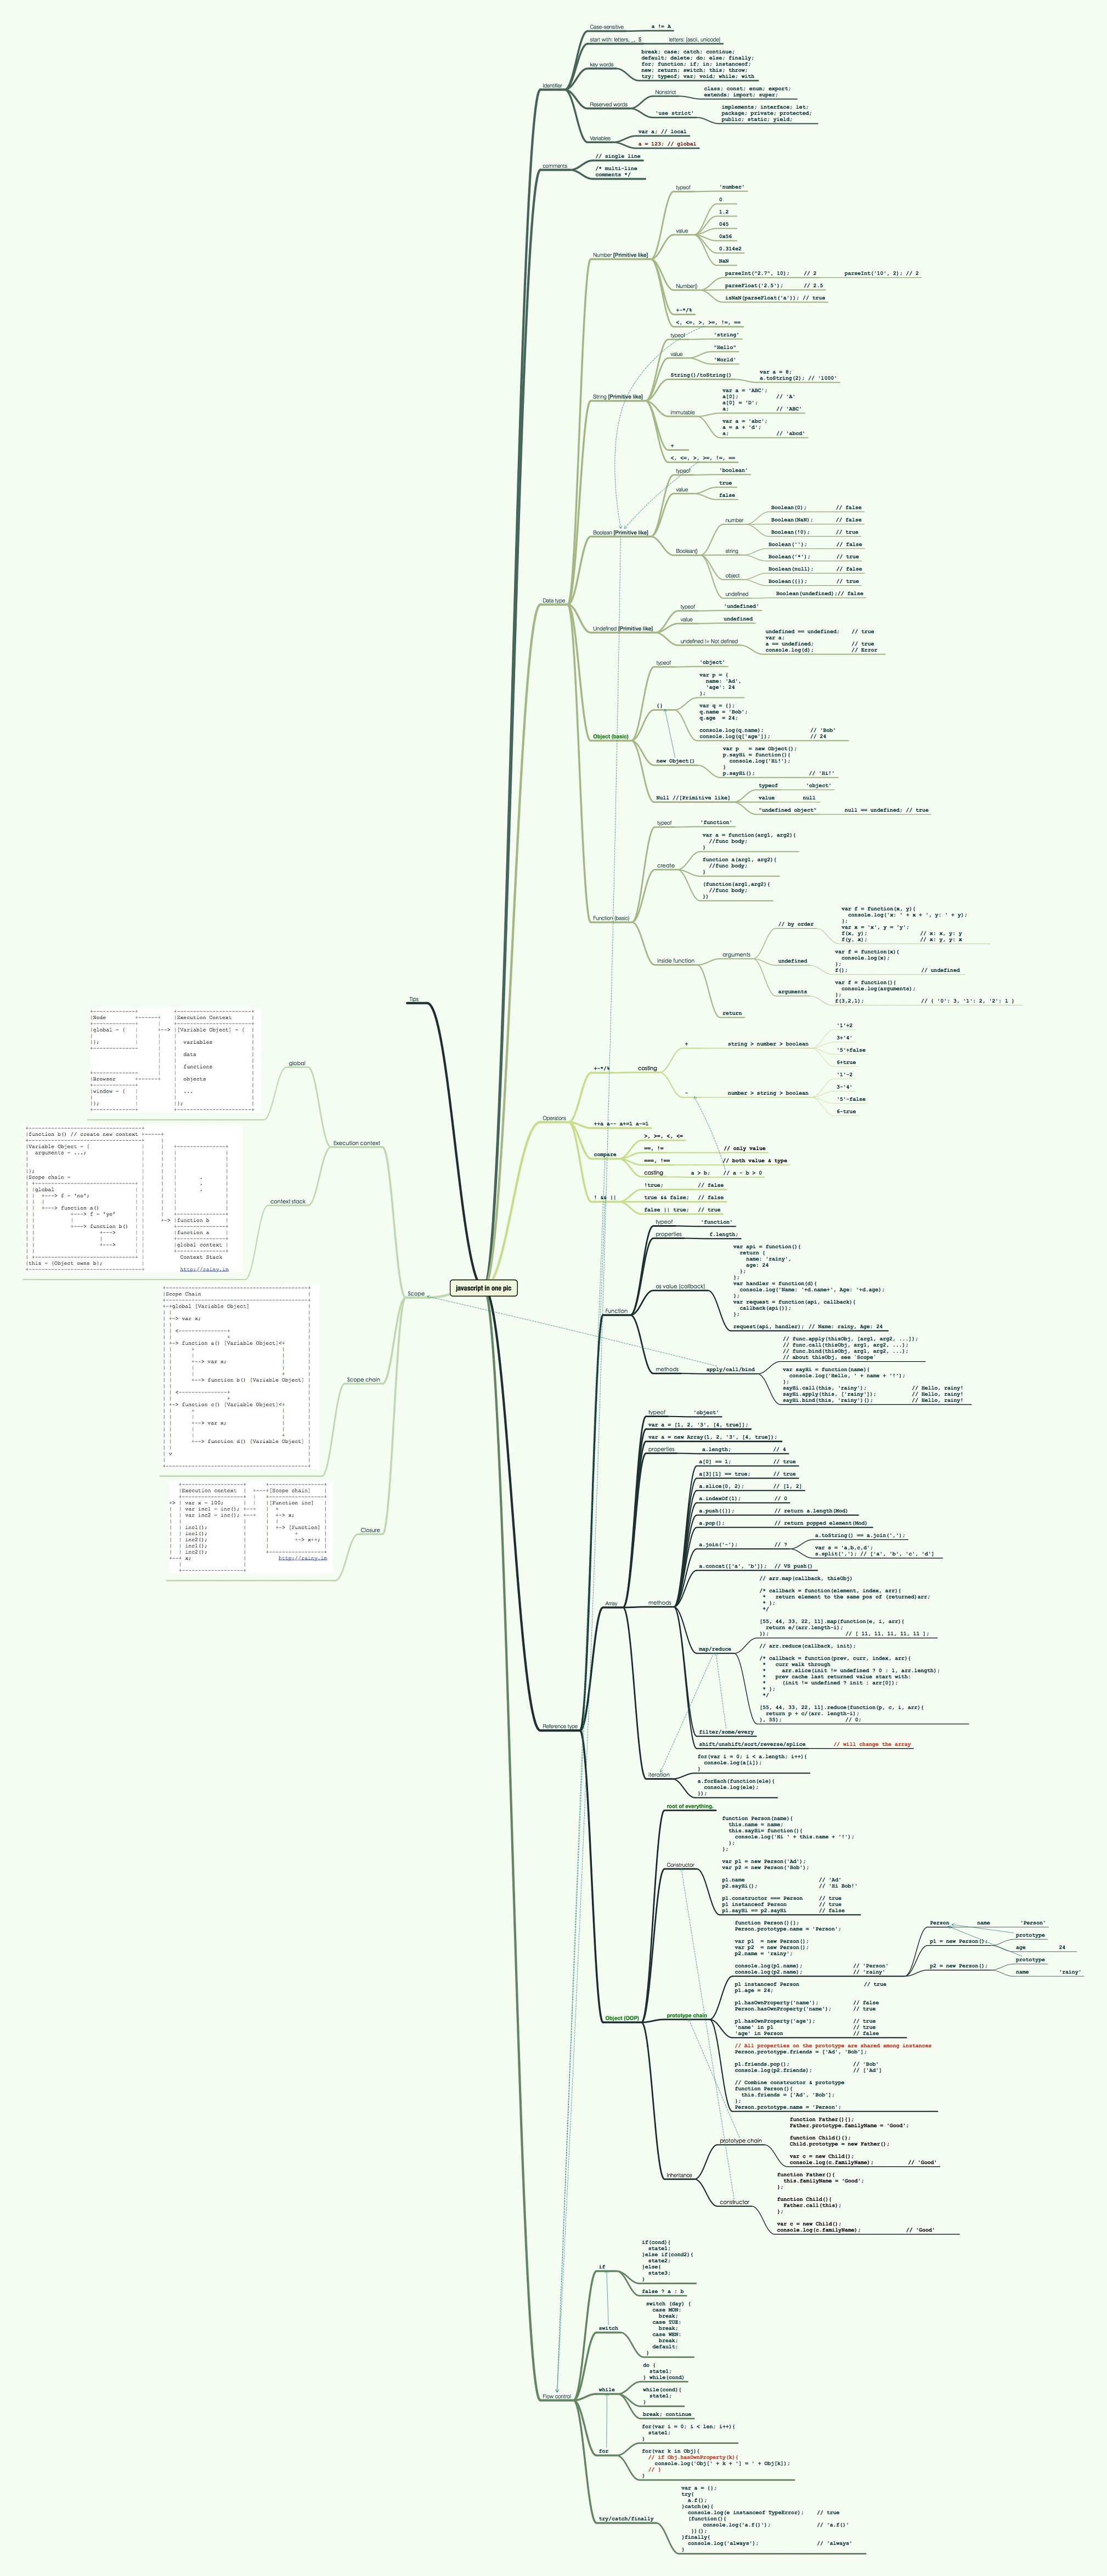 infographic-the-entire-javascript-language-in-one-single-image-491250-2